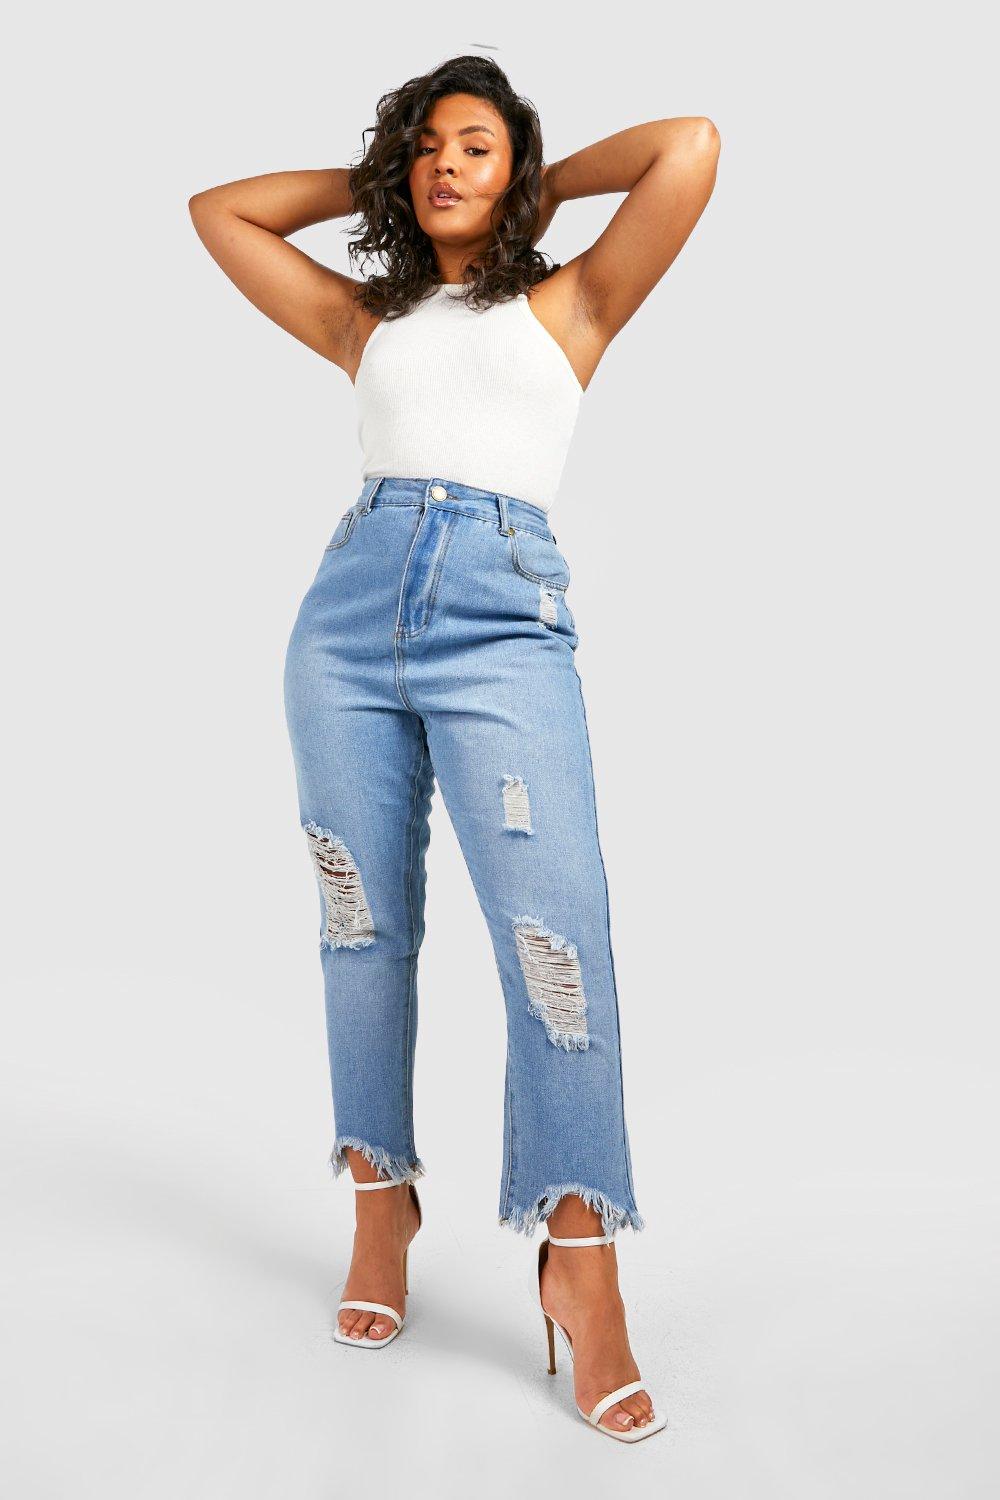 How I Really Feel About Plus Size Mom Jeans - Natalie in the City